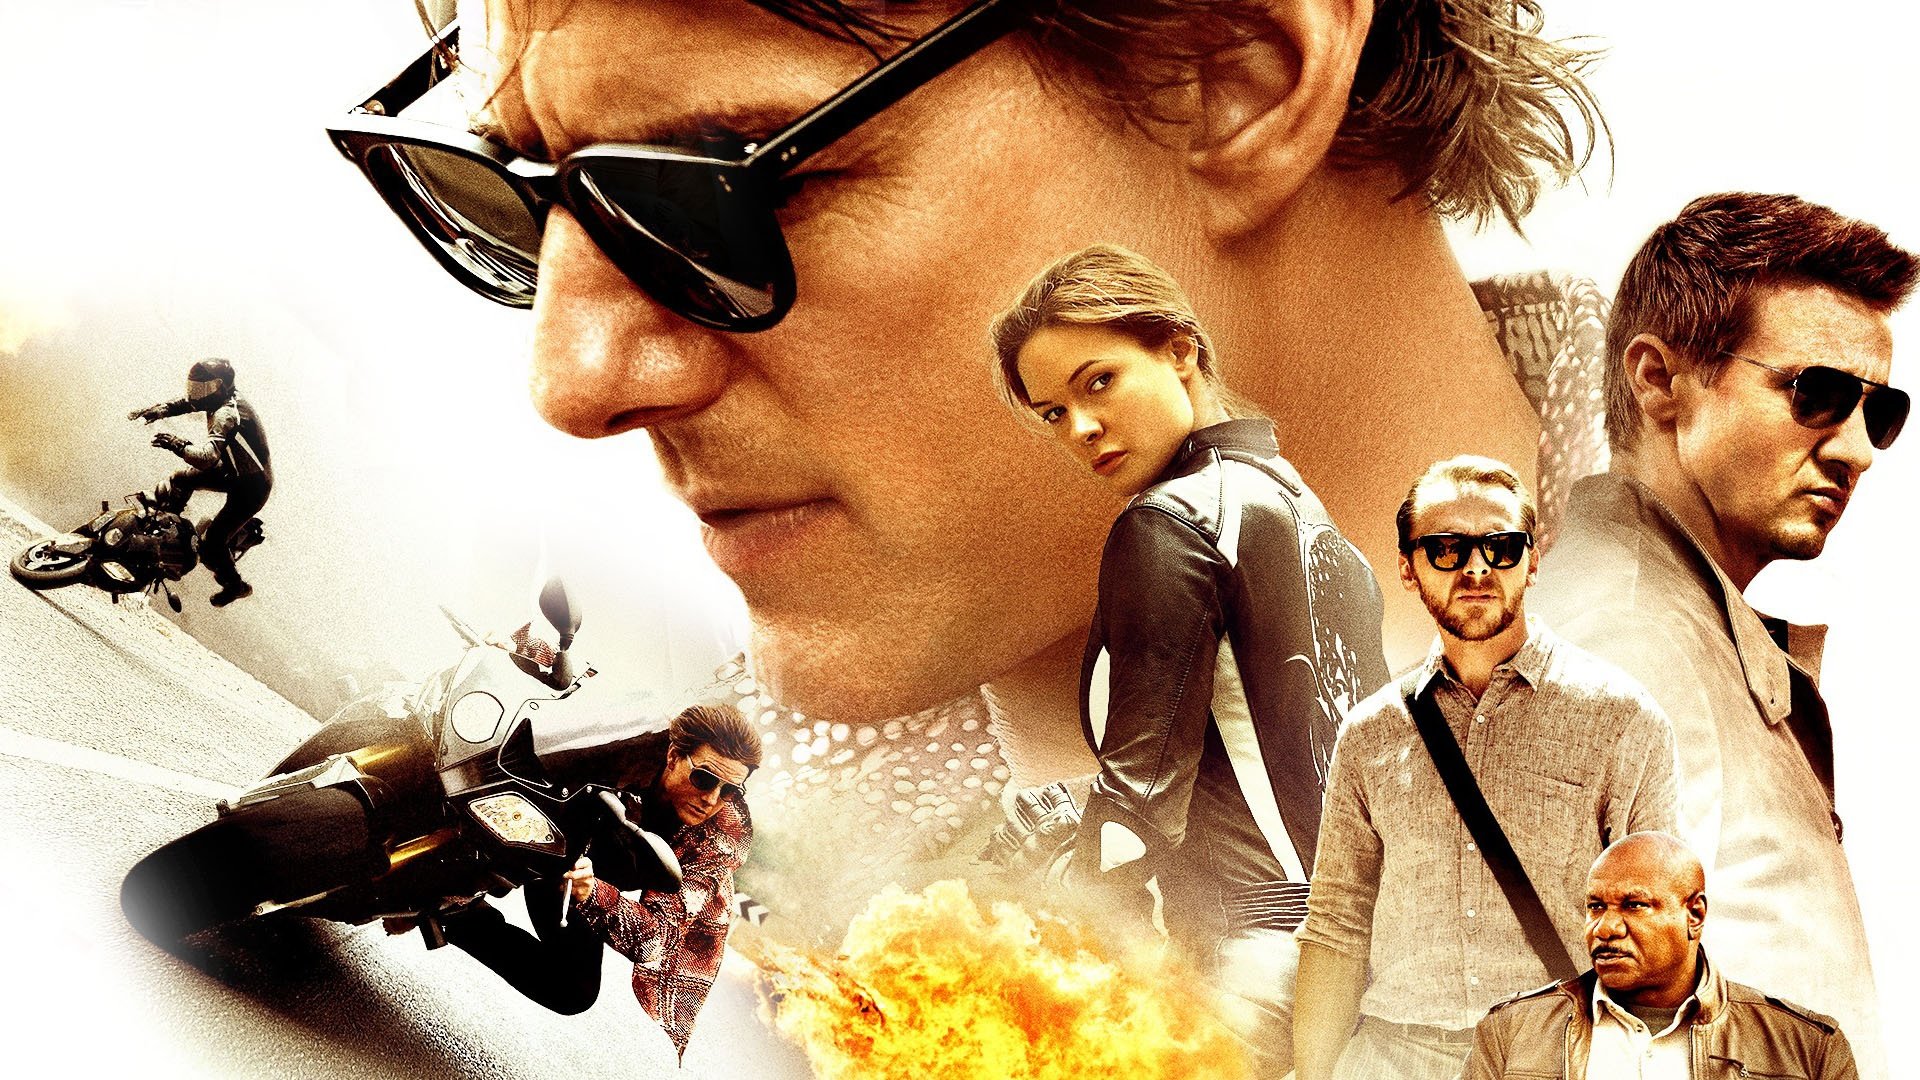 mission impossible 5 rating